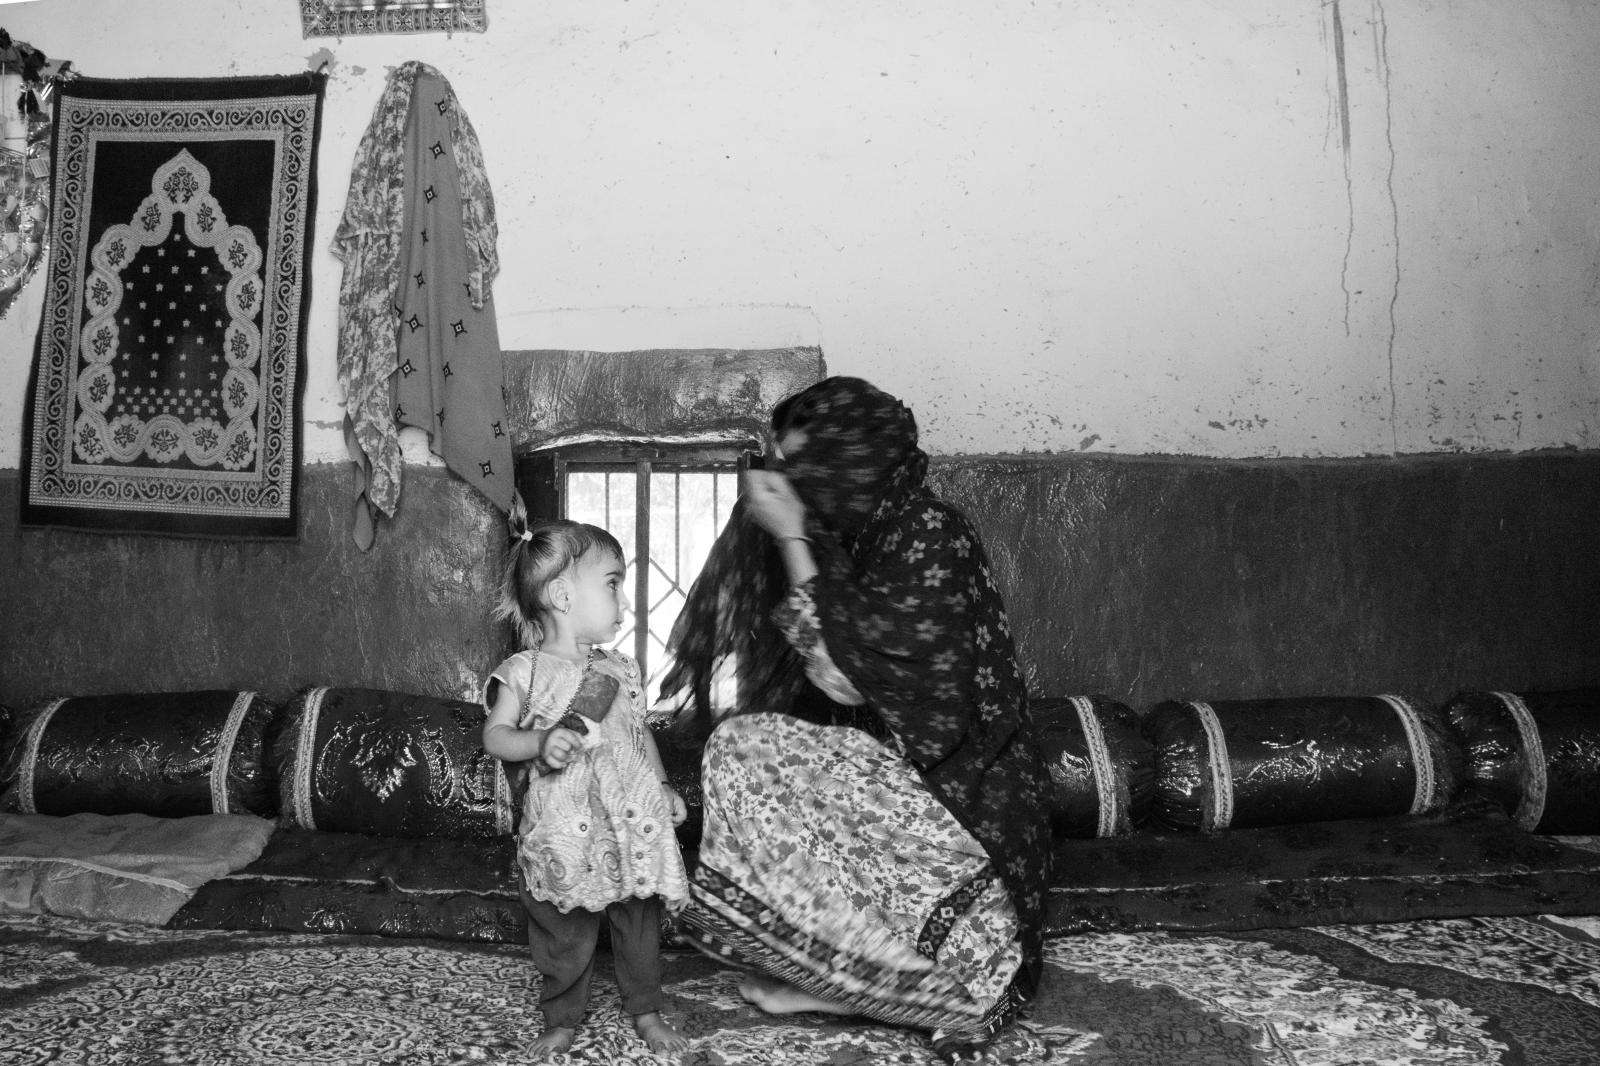 Luma’ (mother) - Fatima with her 1-year-old daughter. [Village of Moola...